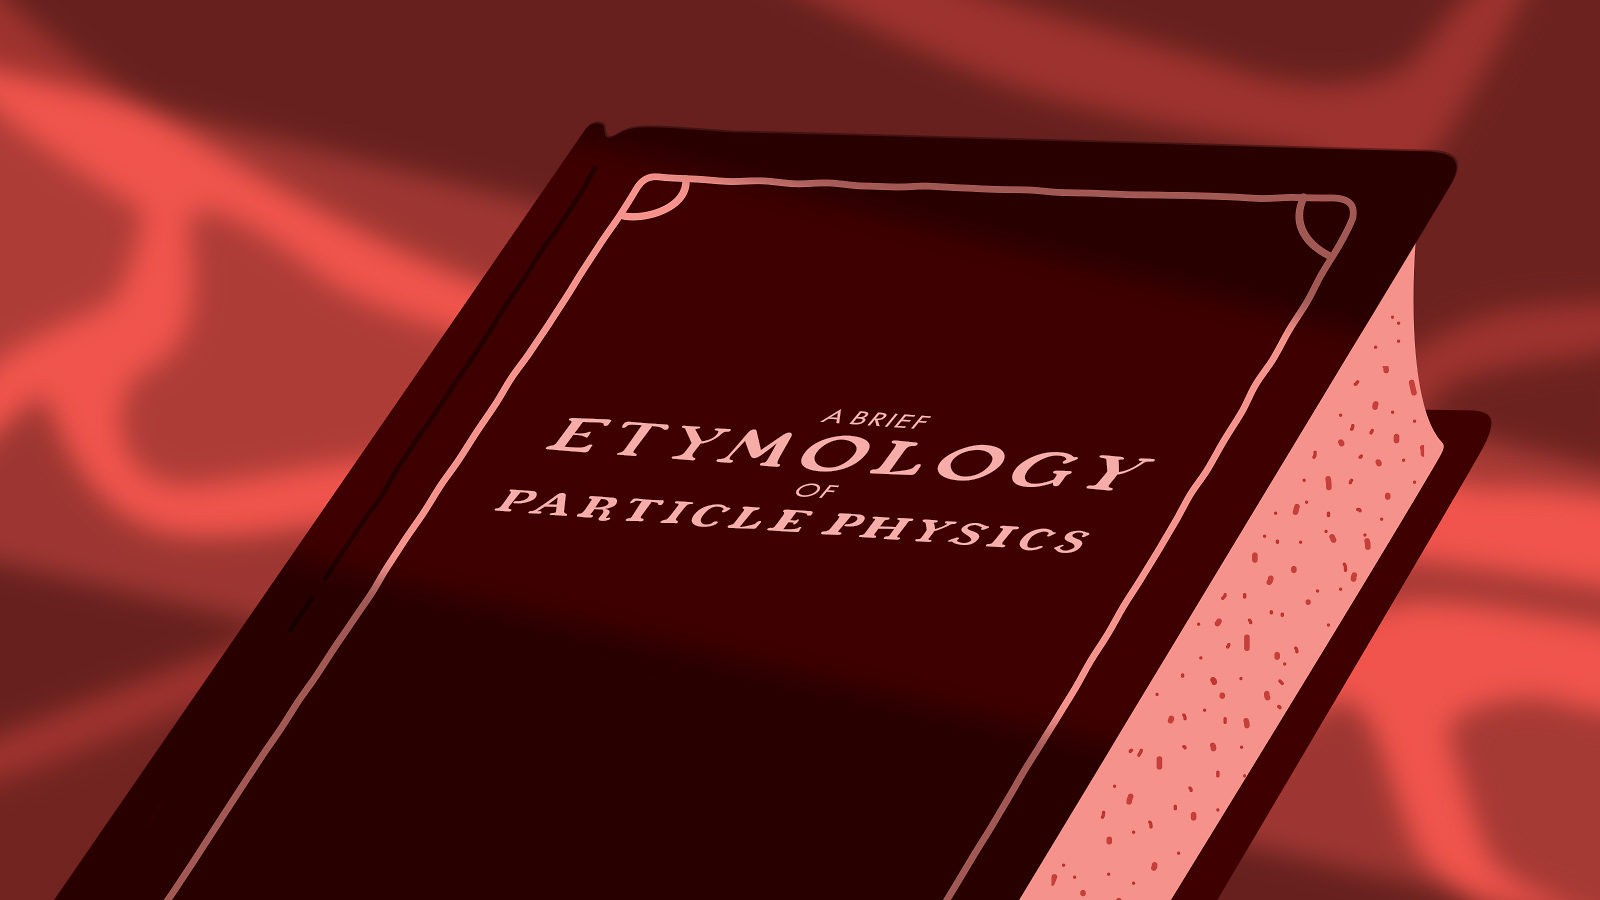 A brief etymology of particle physics book